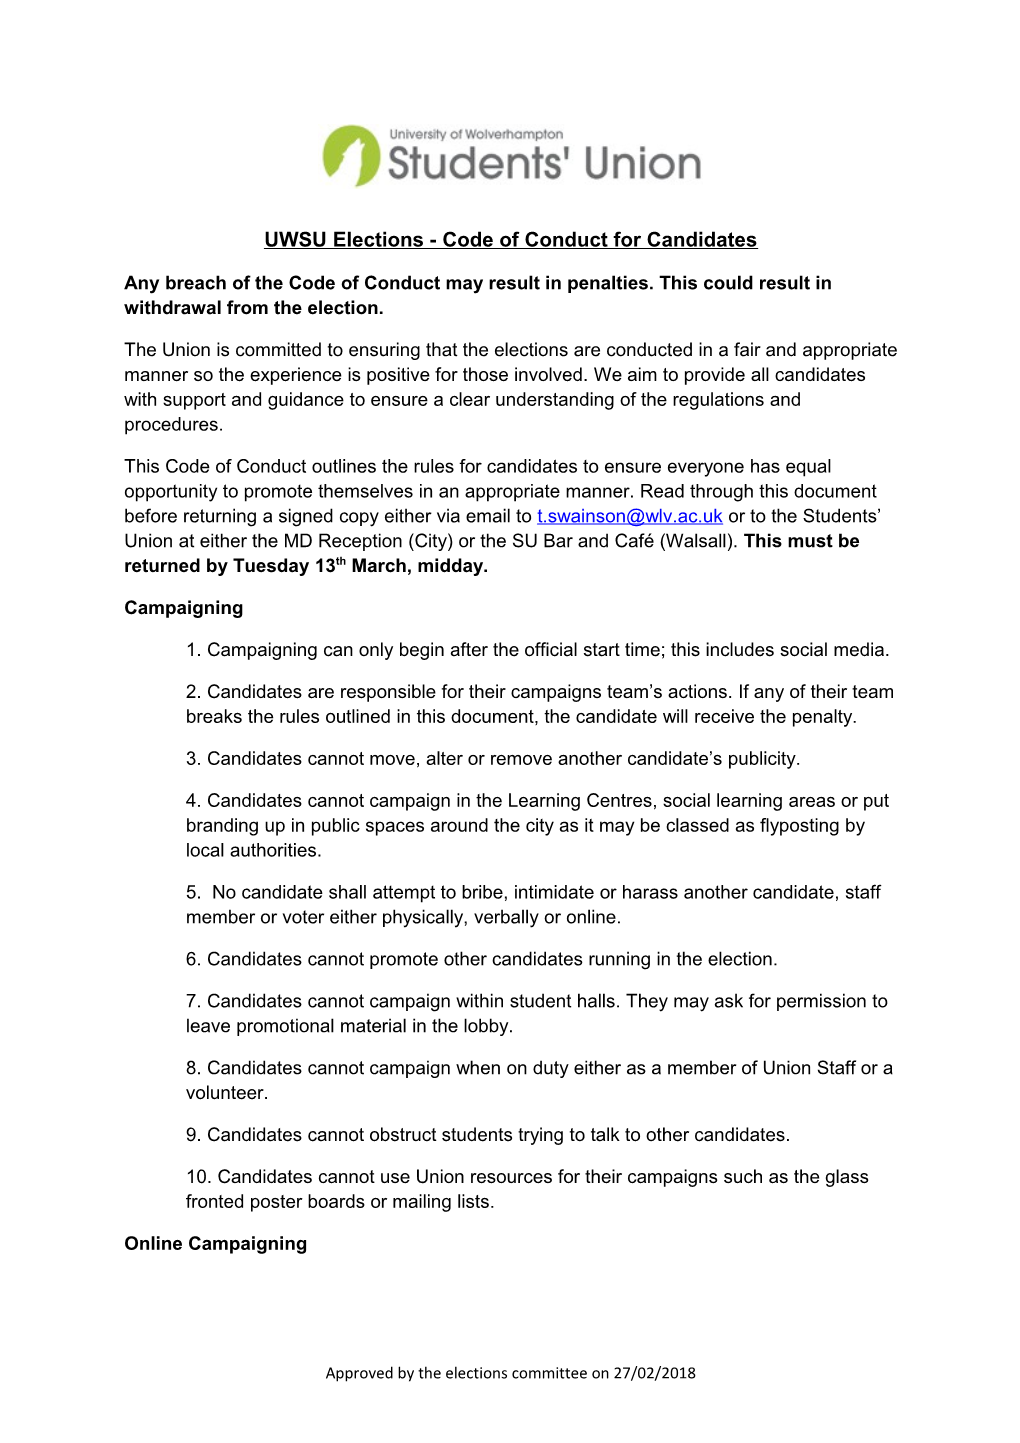 UWSU Elections - Code of Conduct for Candidates